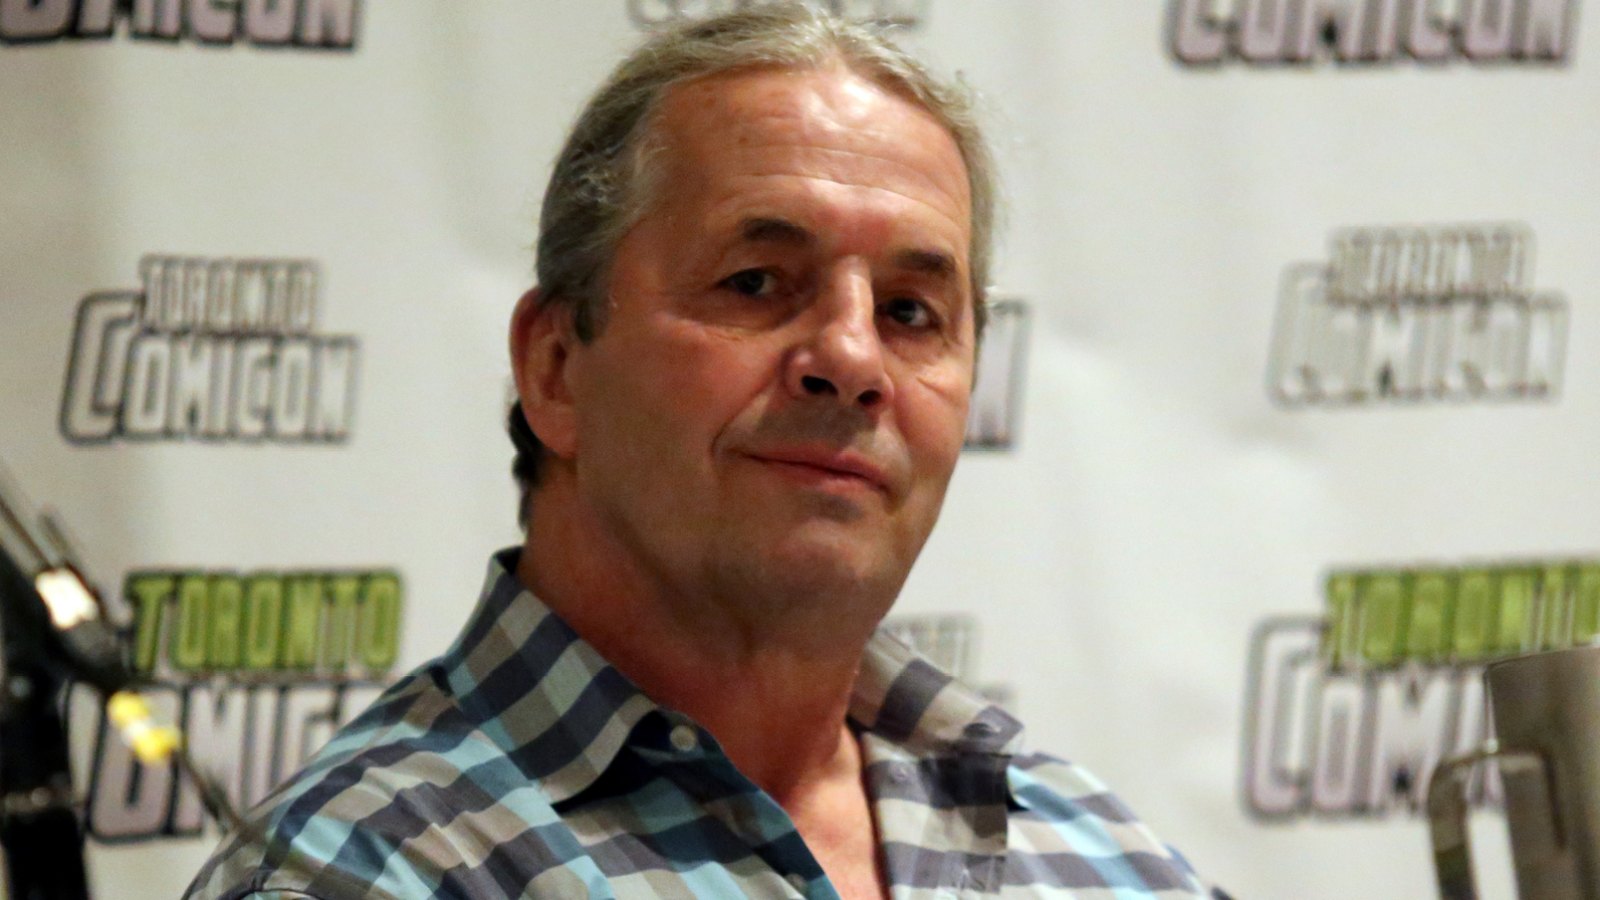 Wrestler Bret Hart Tackled By Fan Onstage at WWE Hall of Fame Ceremony